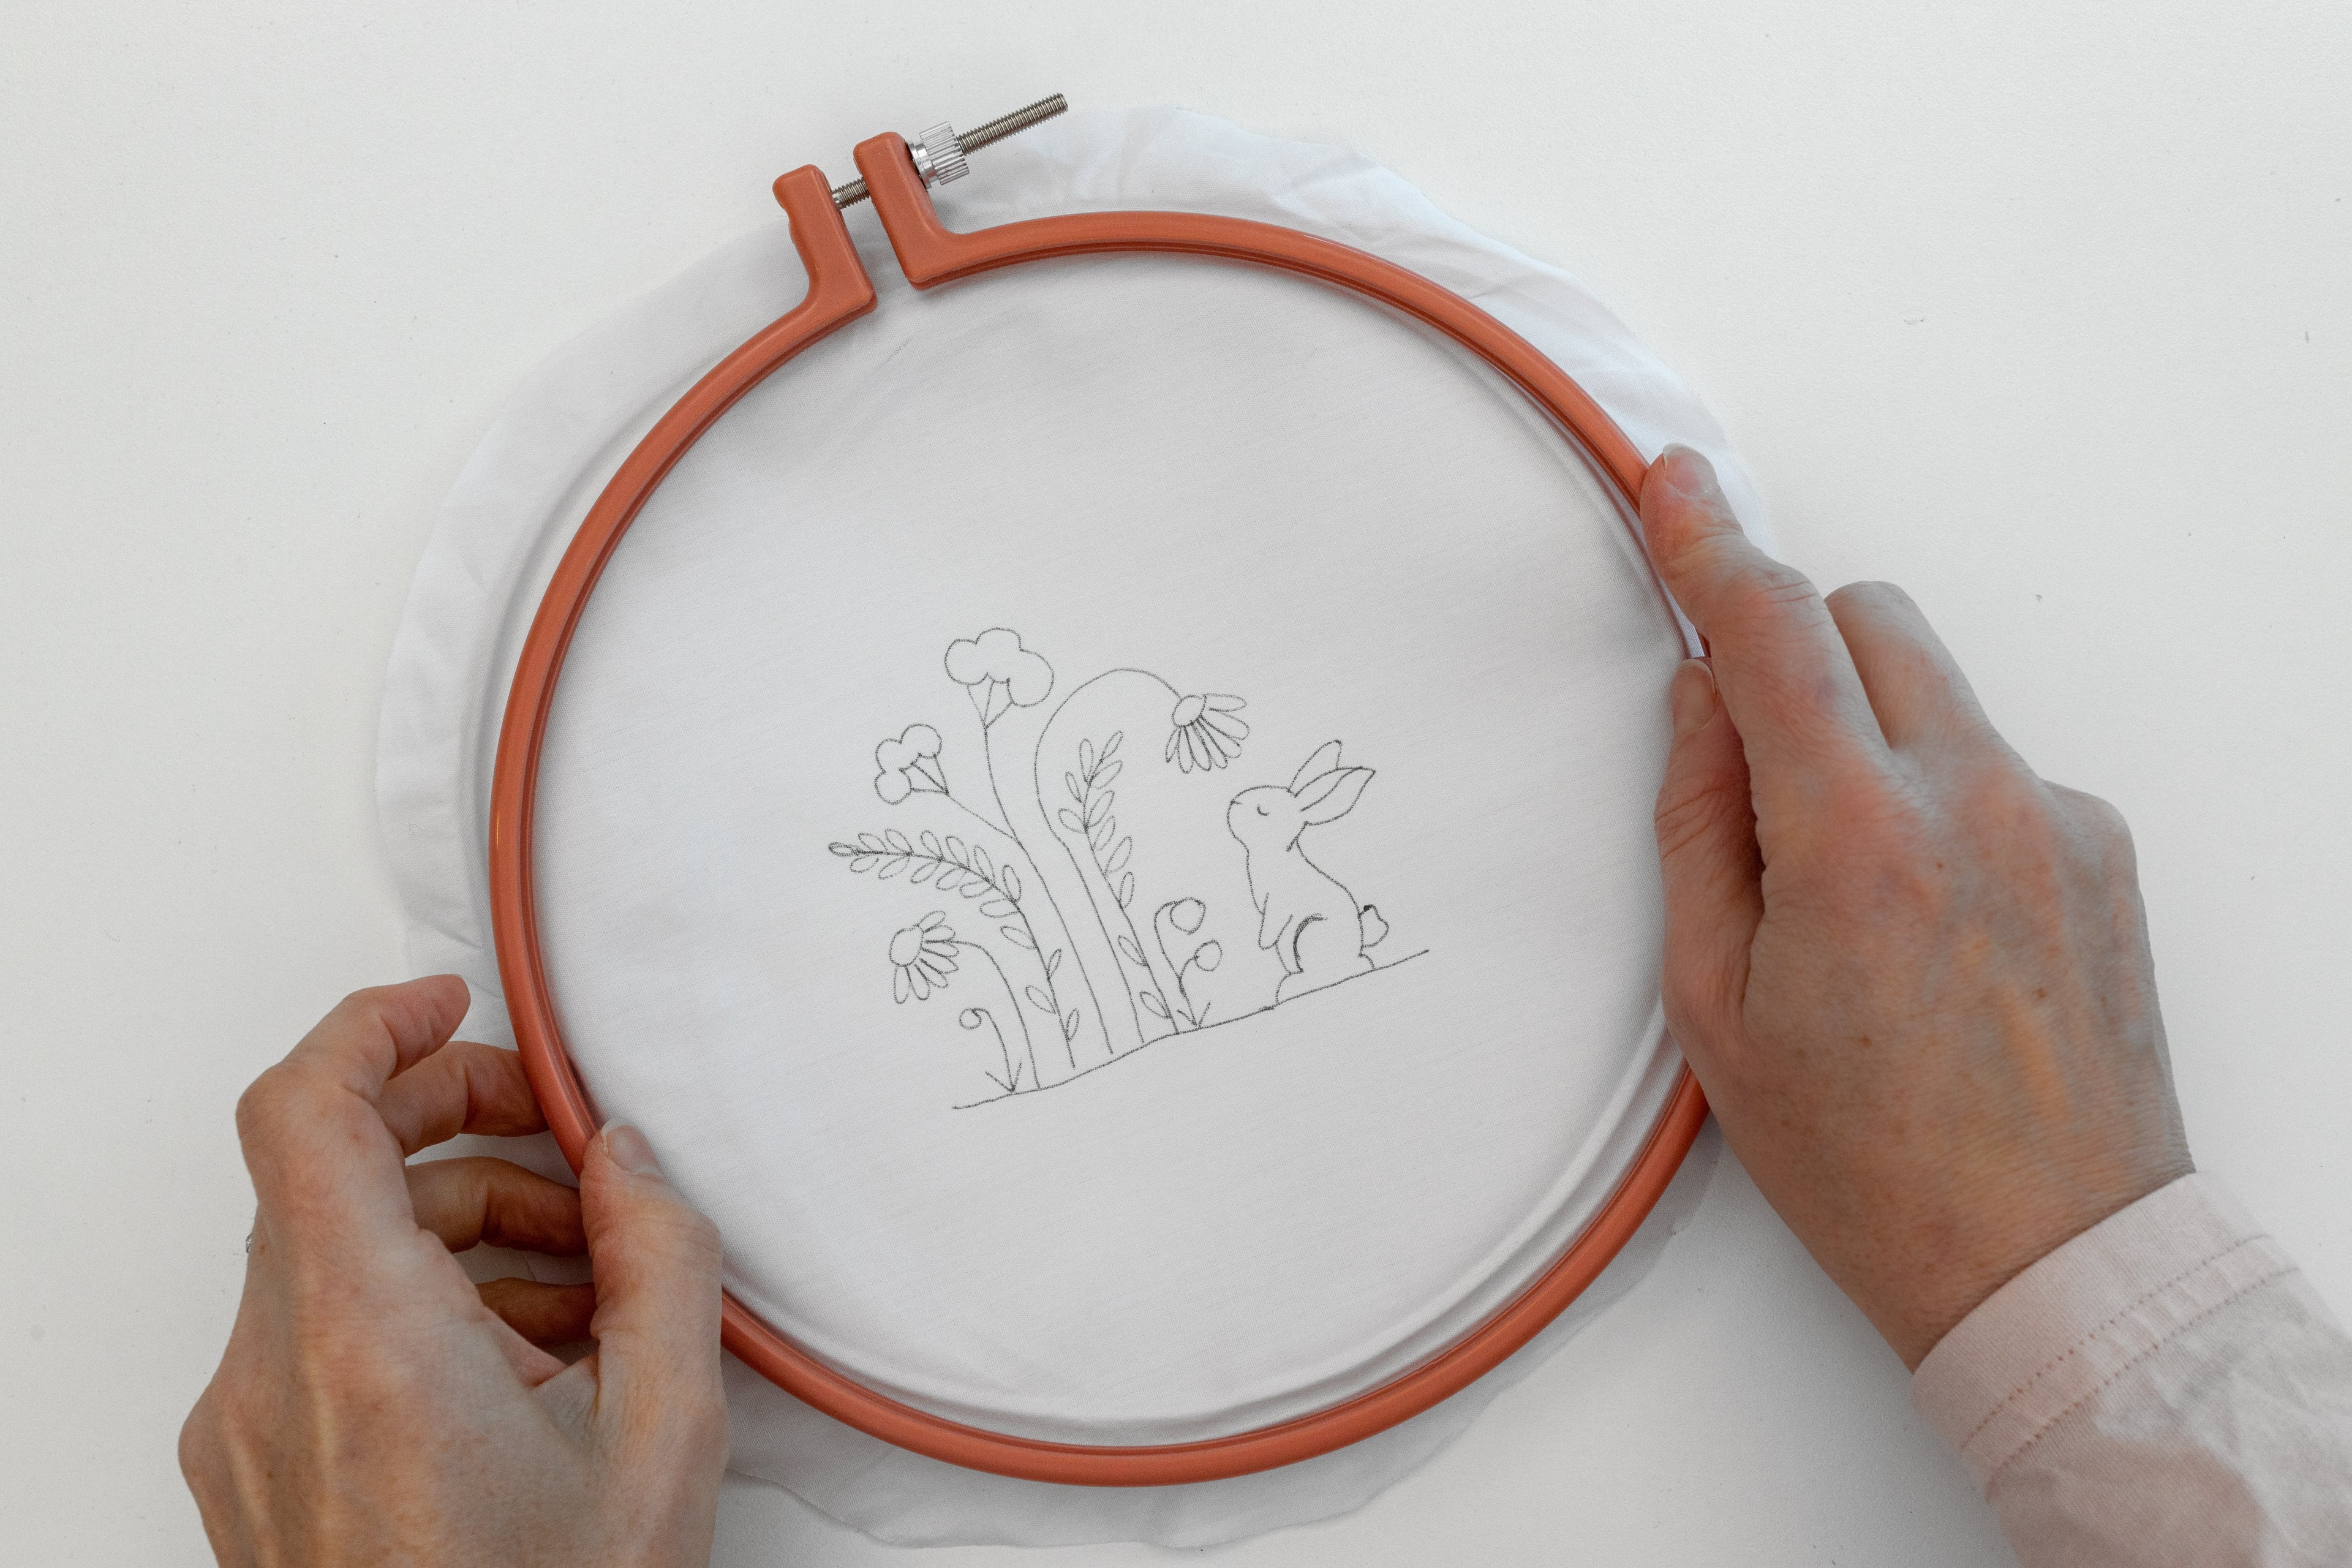 Hands press the outer hoop over fabric with the Bunny Blooms pattern drawn on.